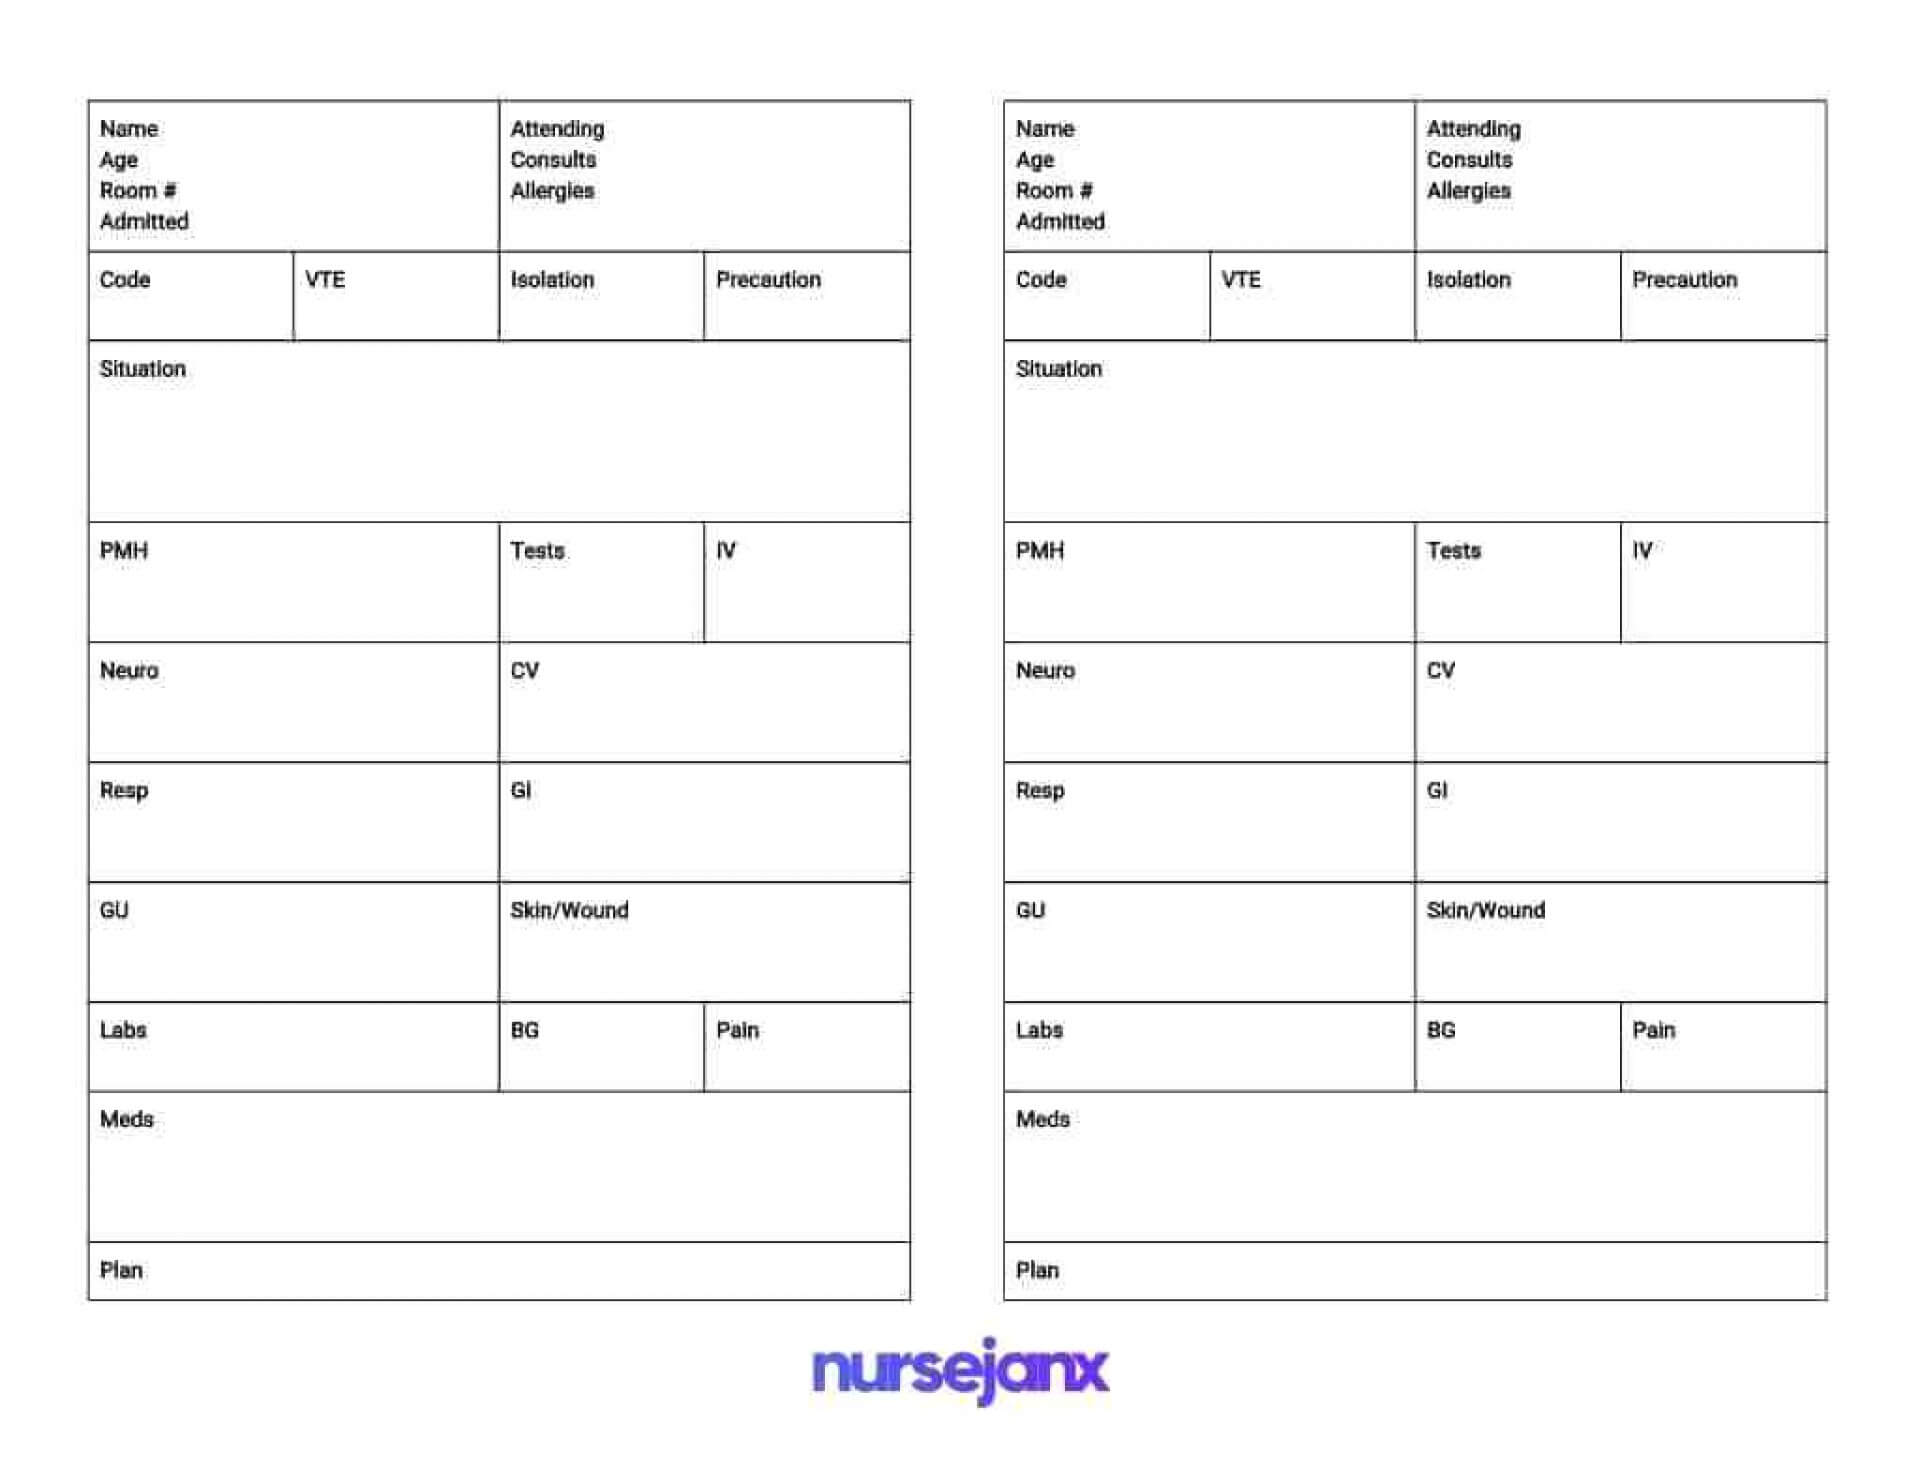 003 Nursing Shift Report Template Unforgettable Ideas Rn Intended For Nurse Shift Report Sheet Template